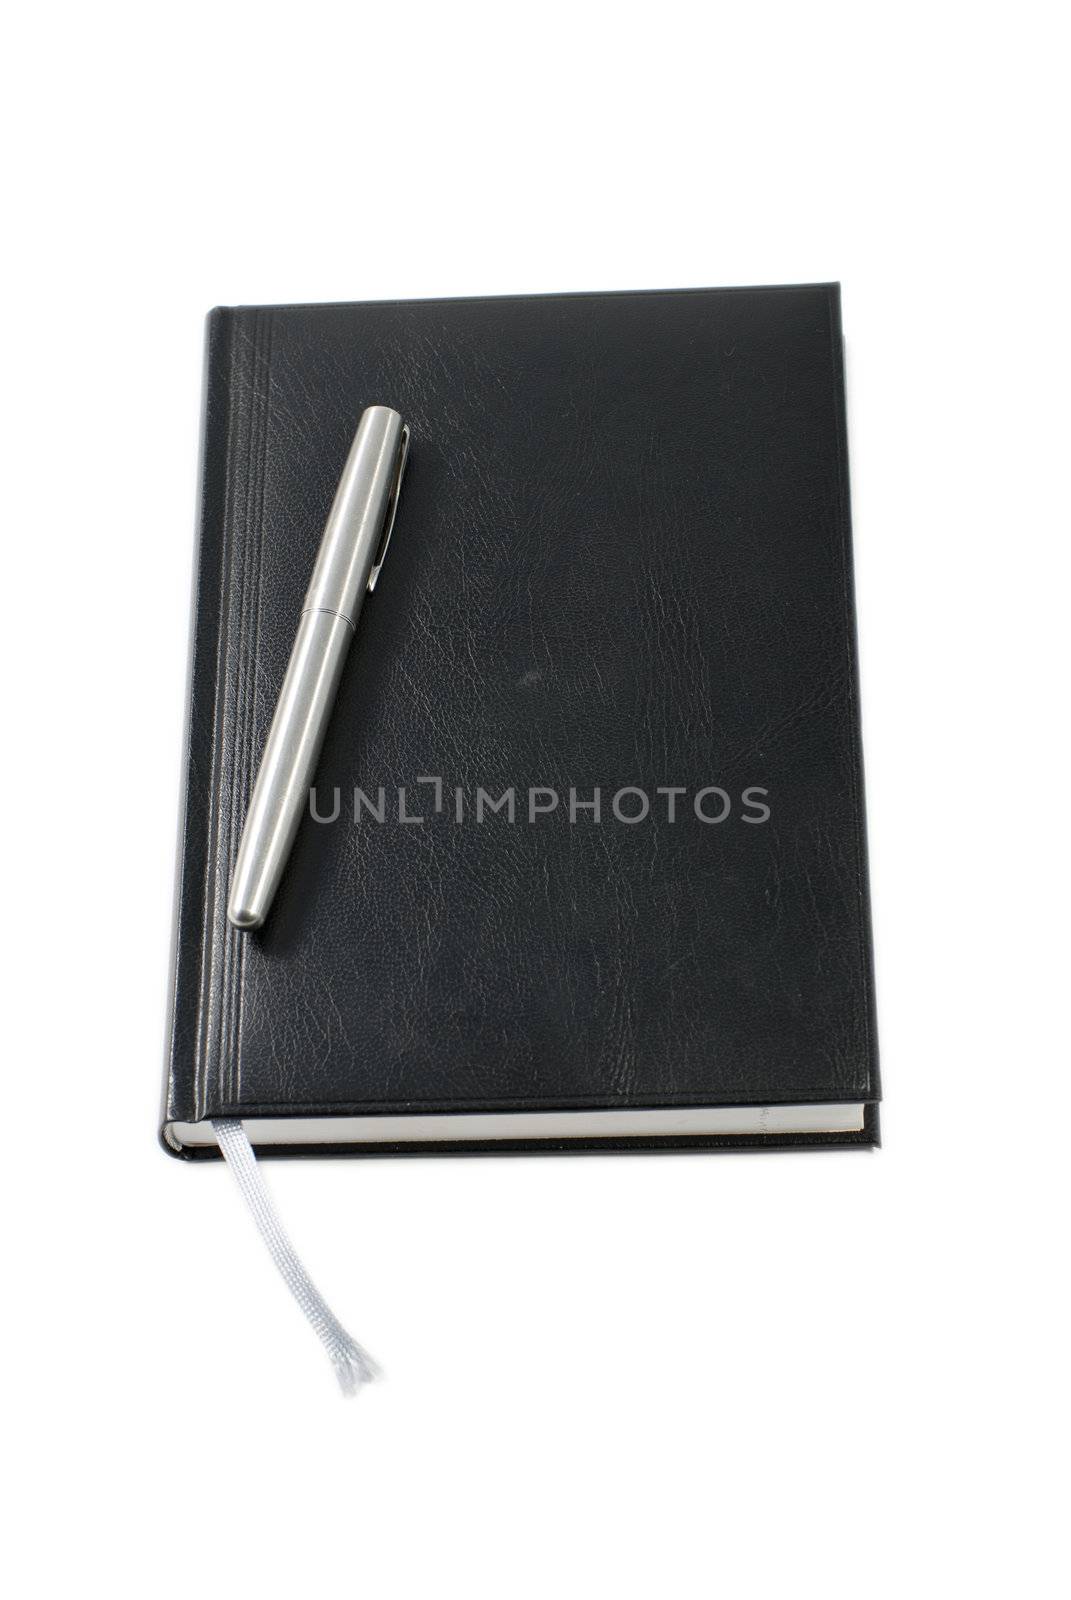 Pen and notebook on white background